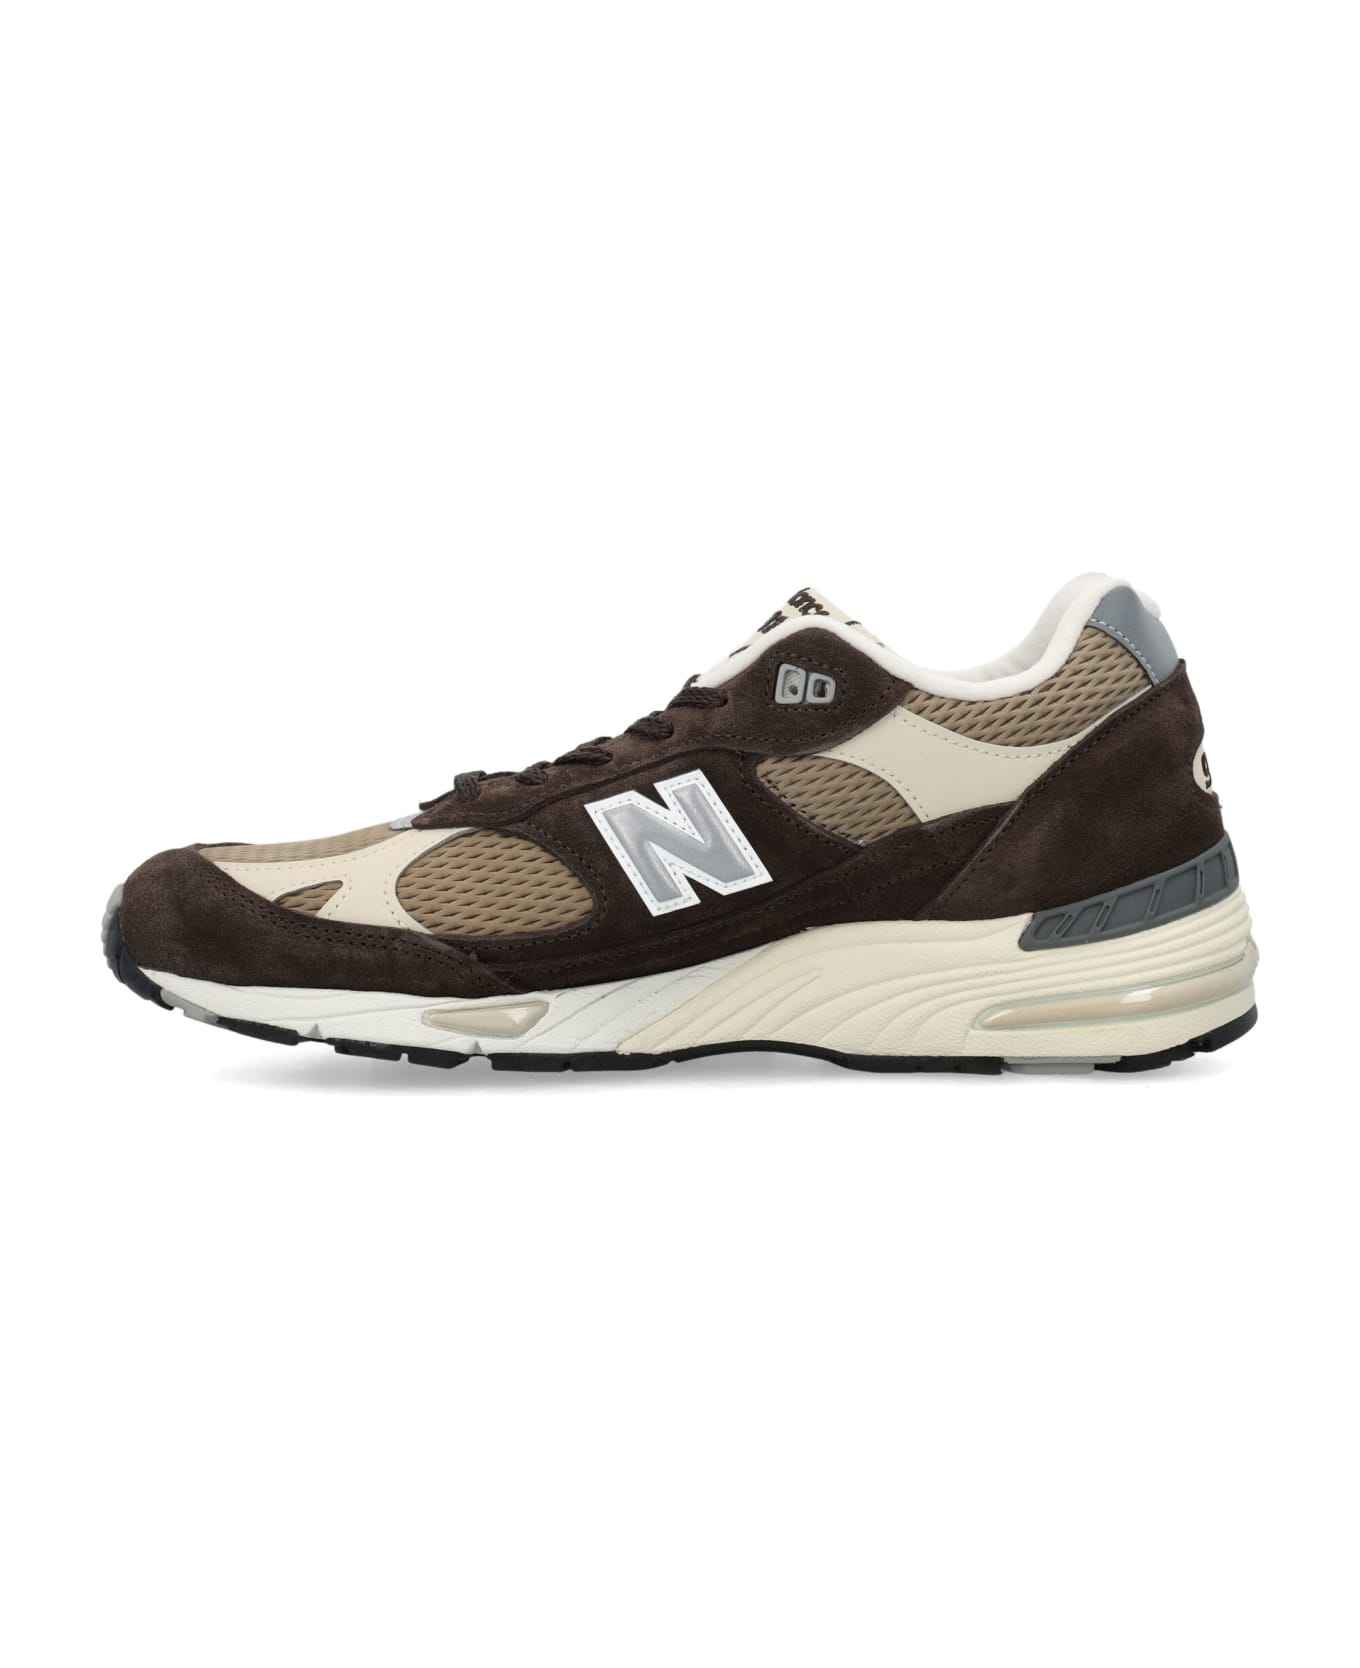 New Balance Made In Uk 991 V1 Finale - BROWN